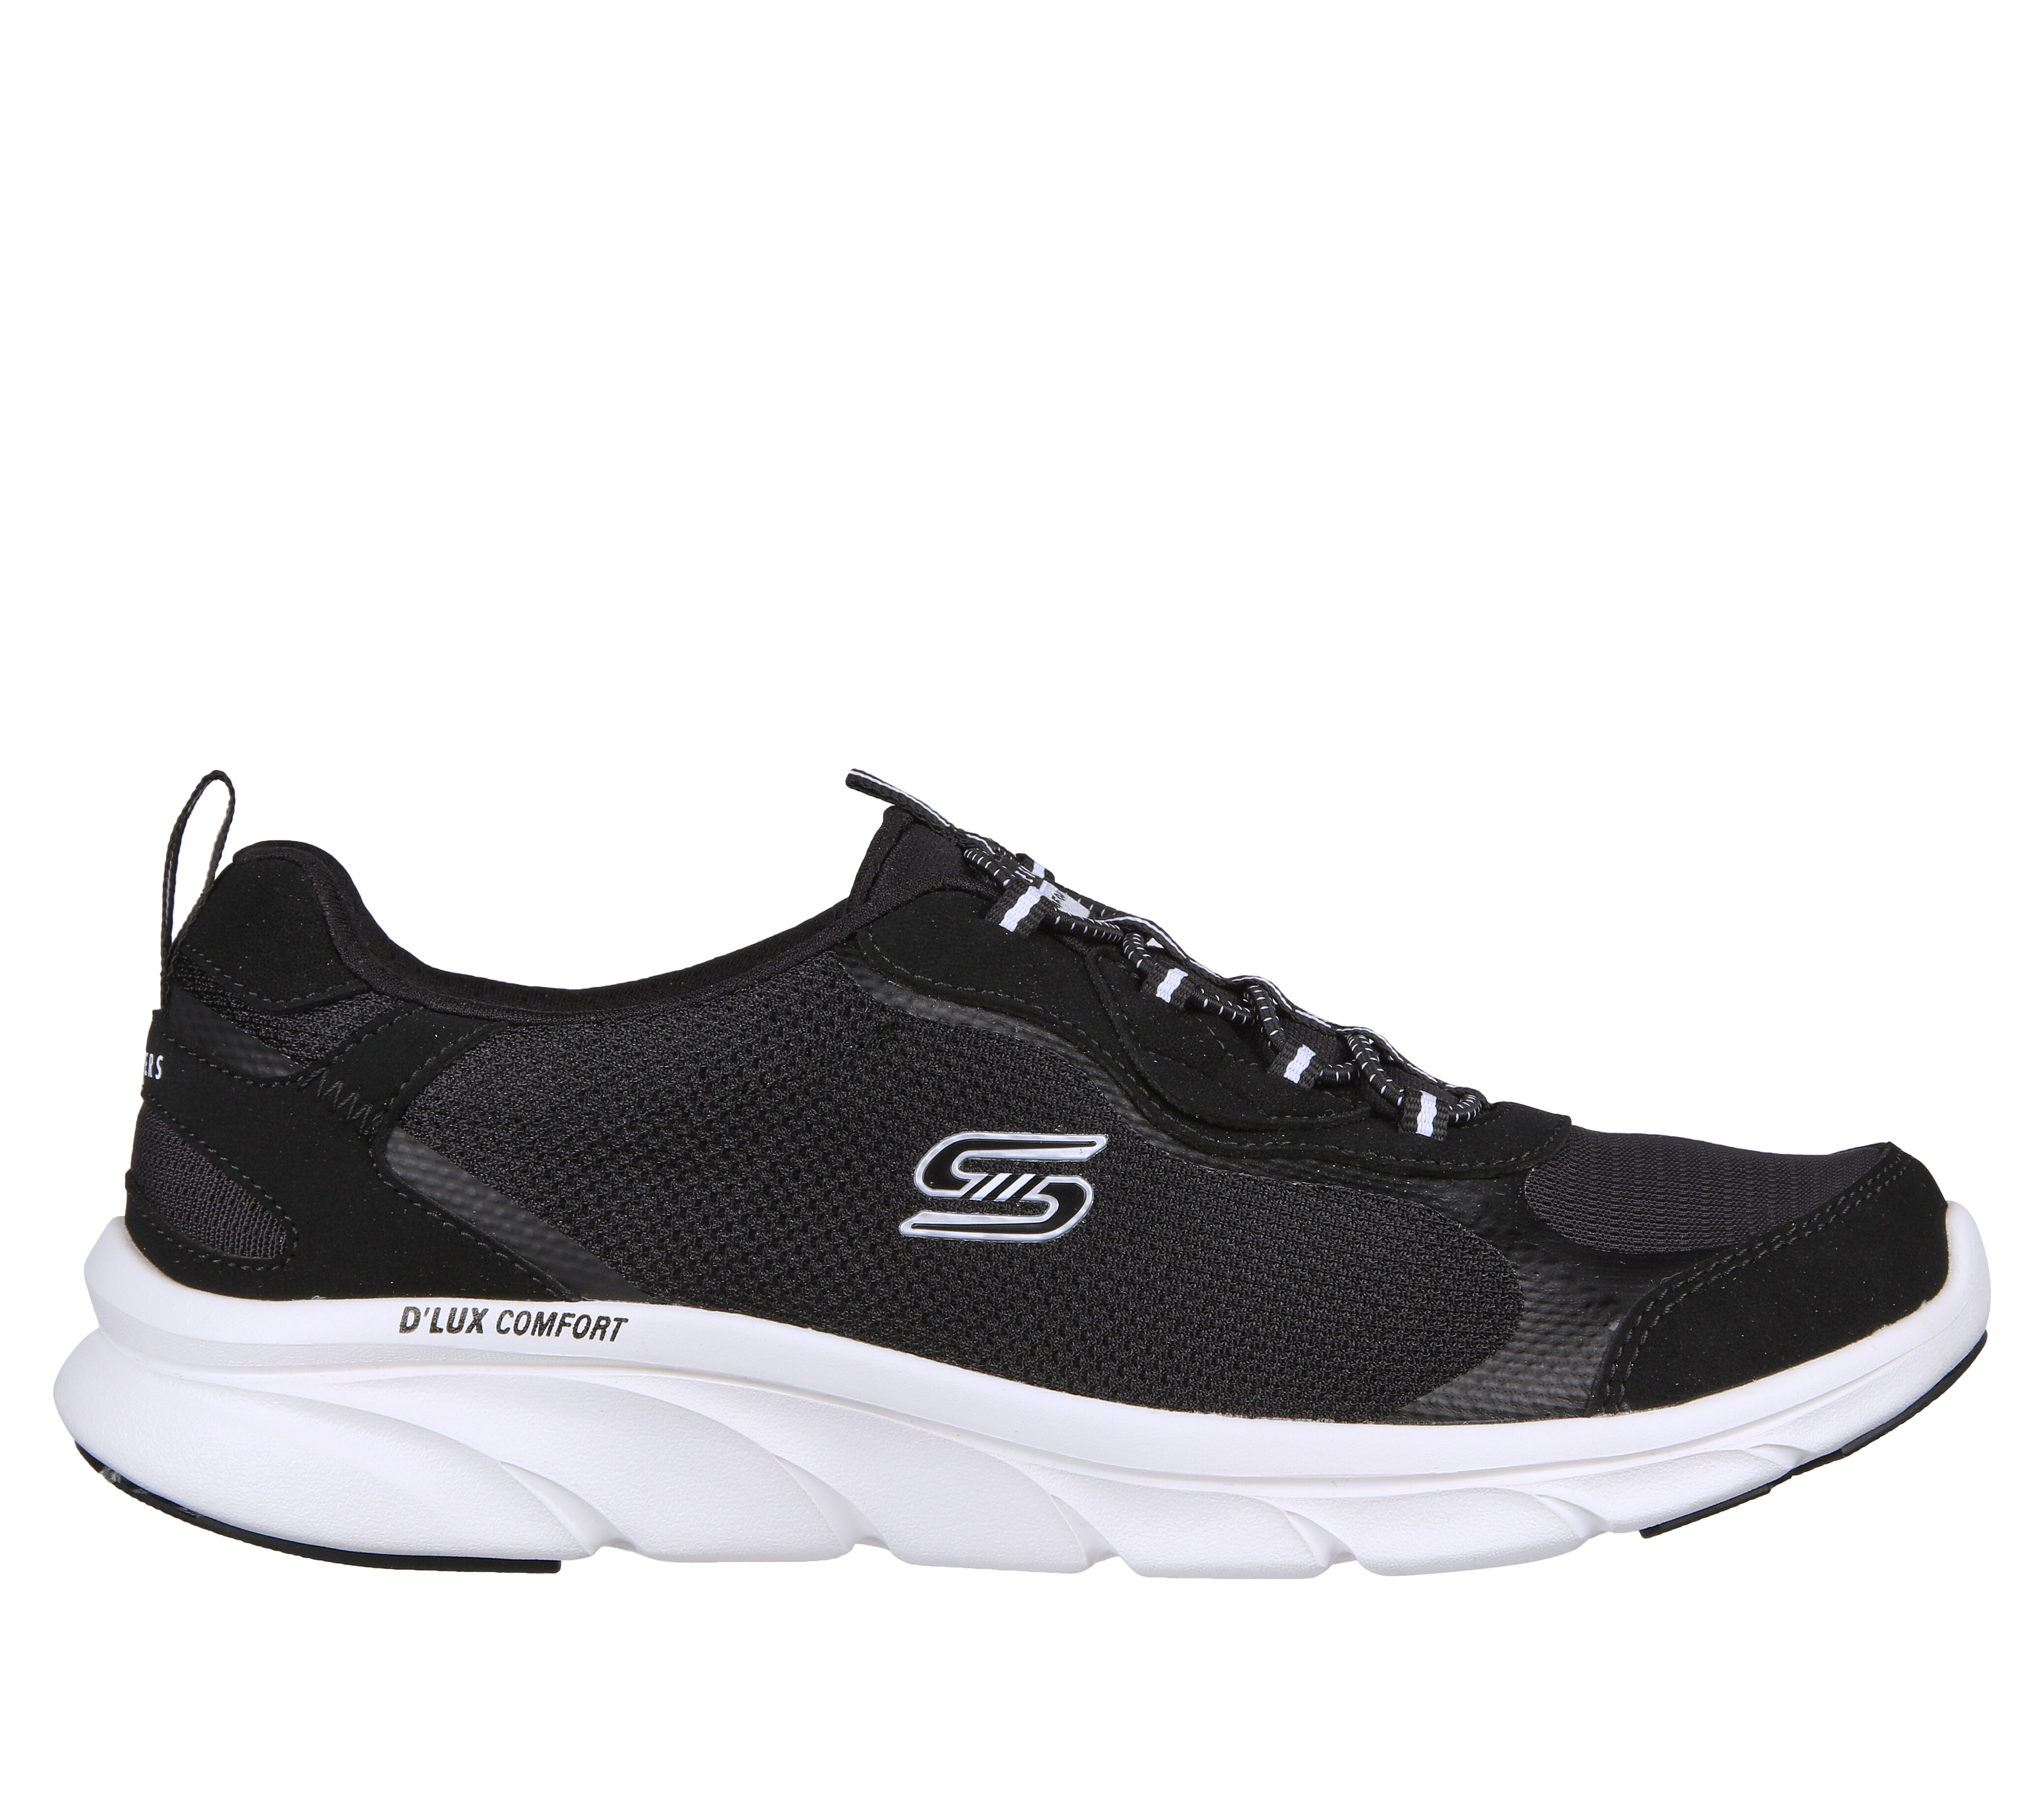 skechers relaxed fit black